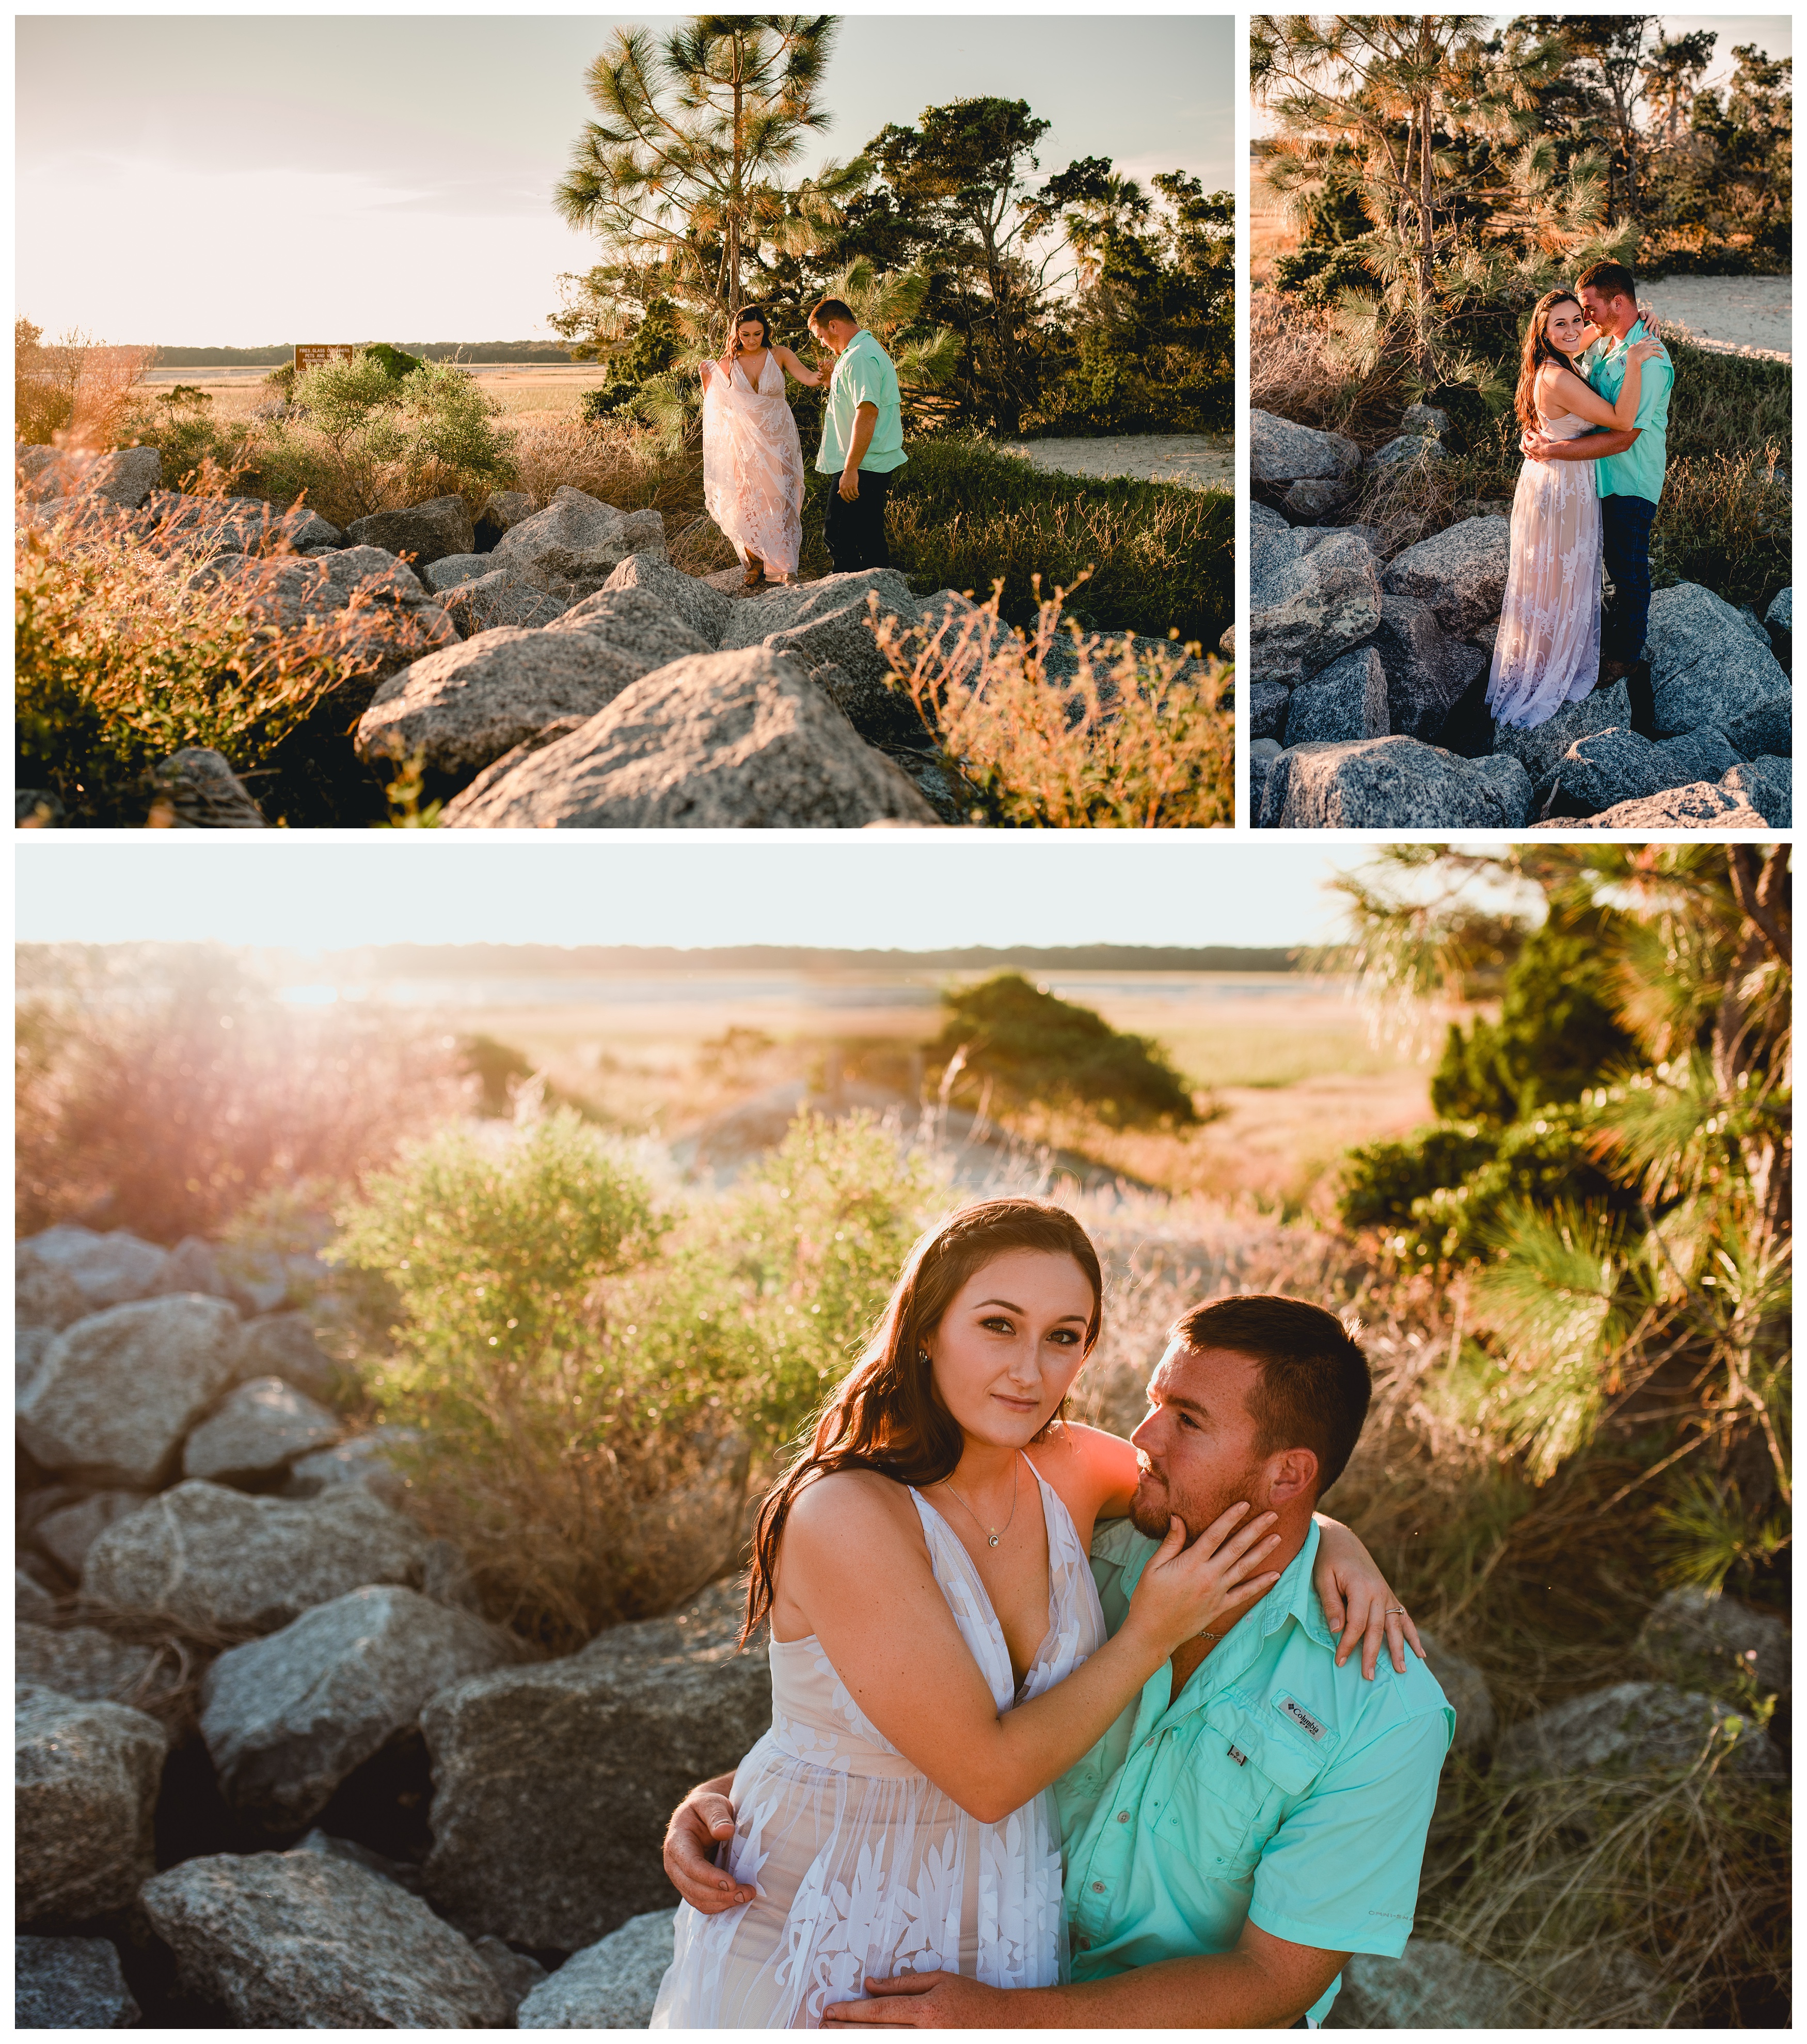 Engagement pics taken on a rocky beach in Jacksonville, Fl by professional photographer. Shelly Williams Photography